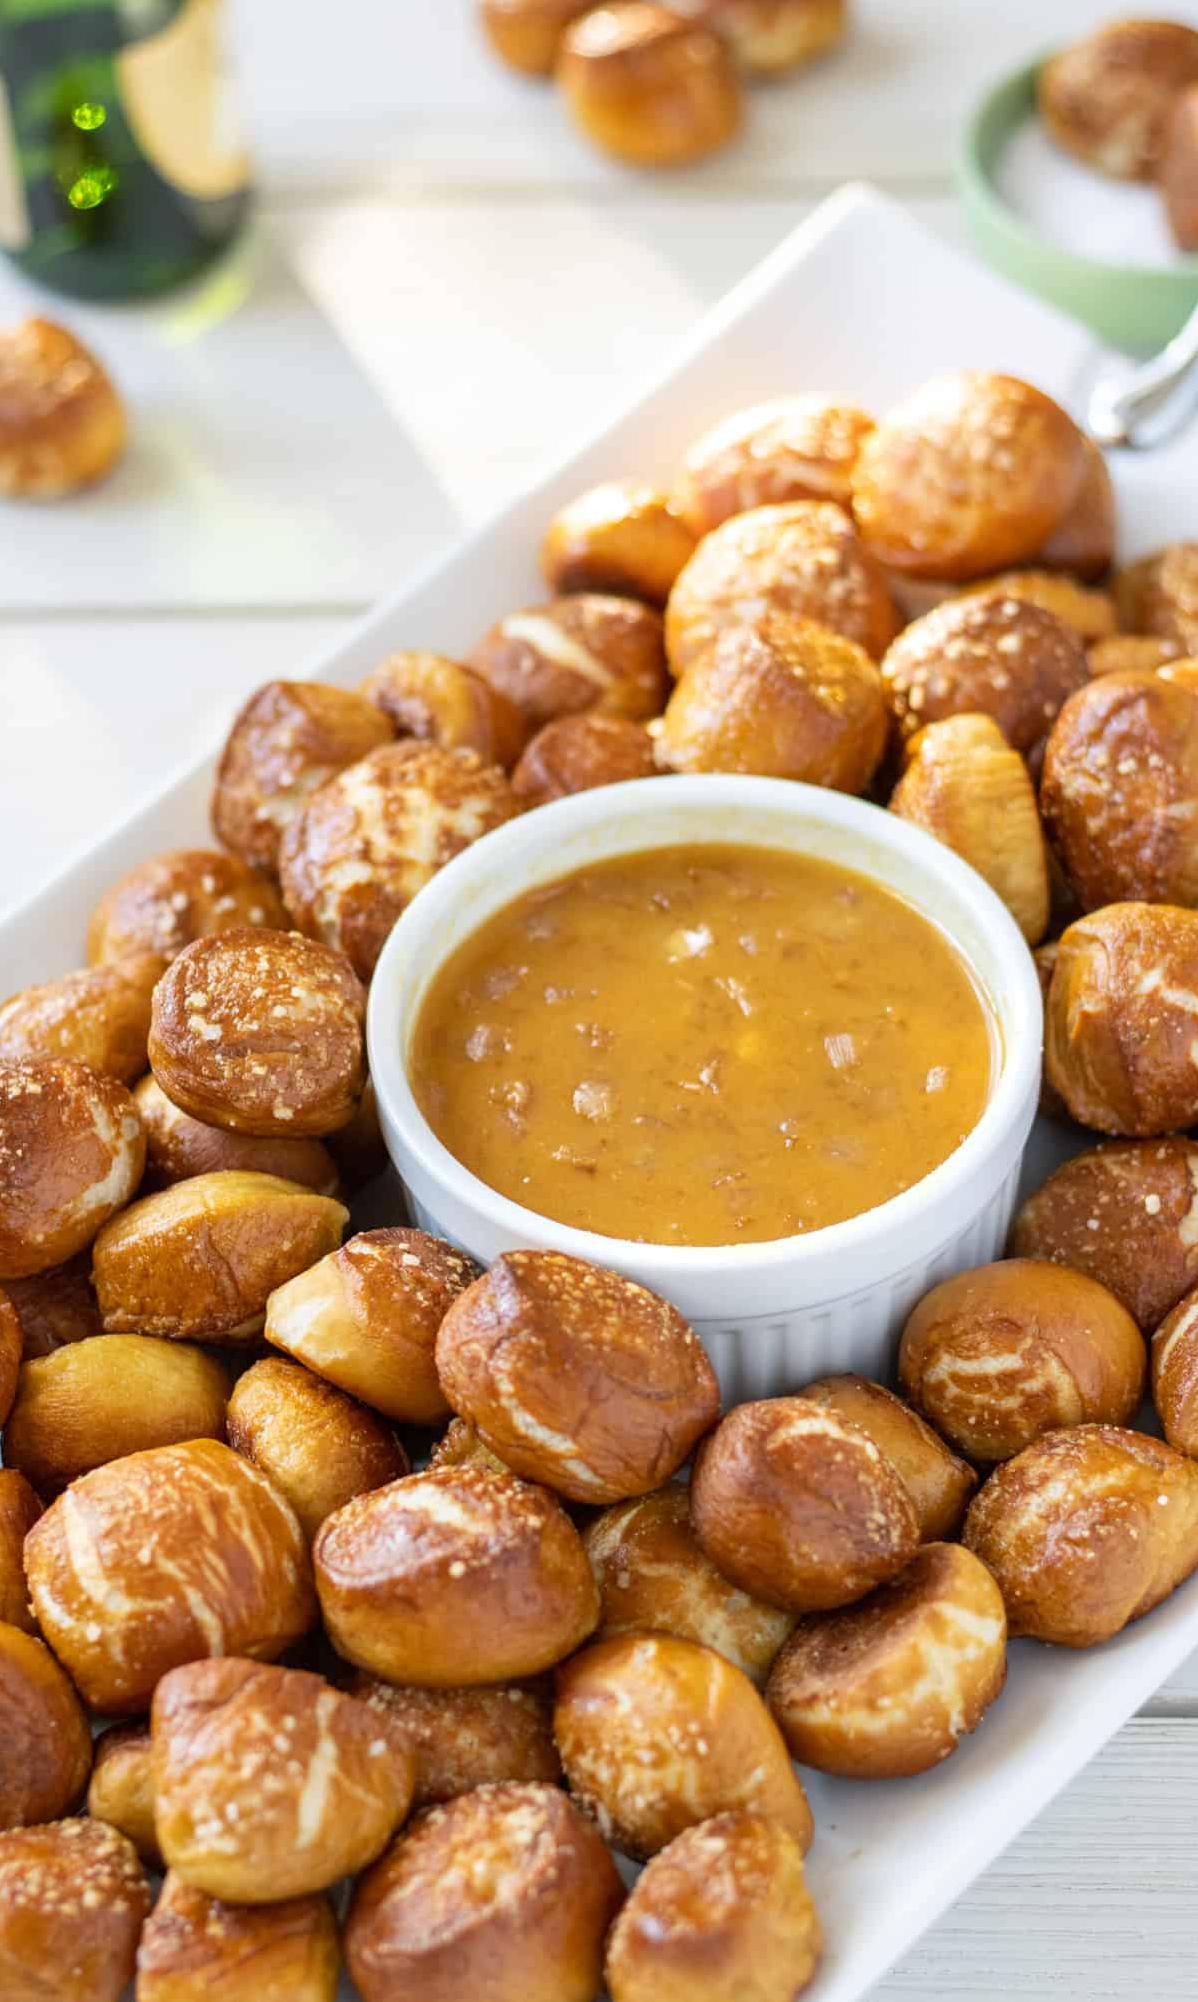  Raise a toast to this delicious champagne honey mustard!